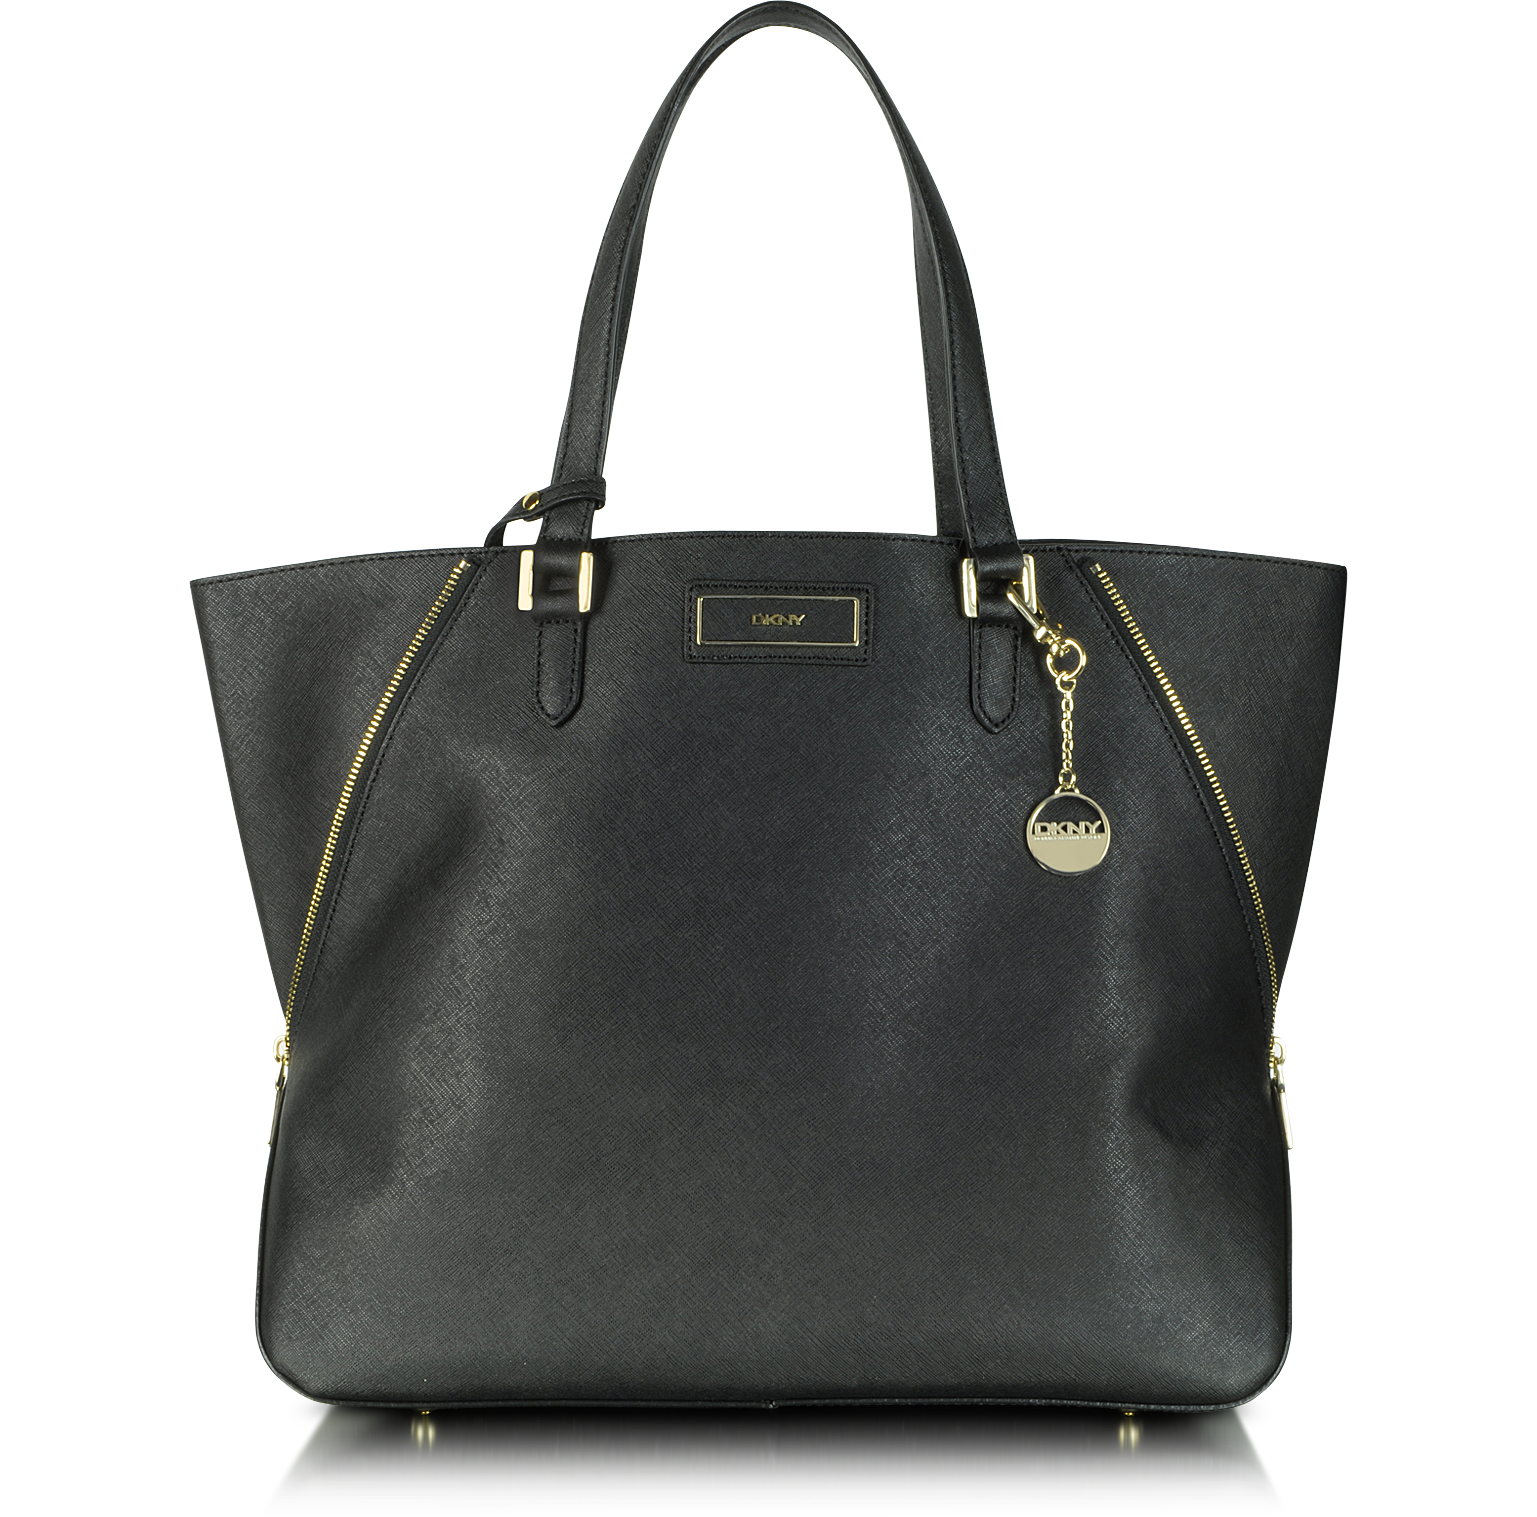 DKNY Black Large Saffiano Leather Zip Tote at FORZIERI